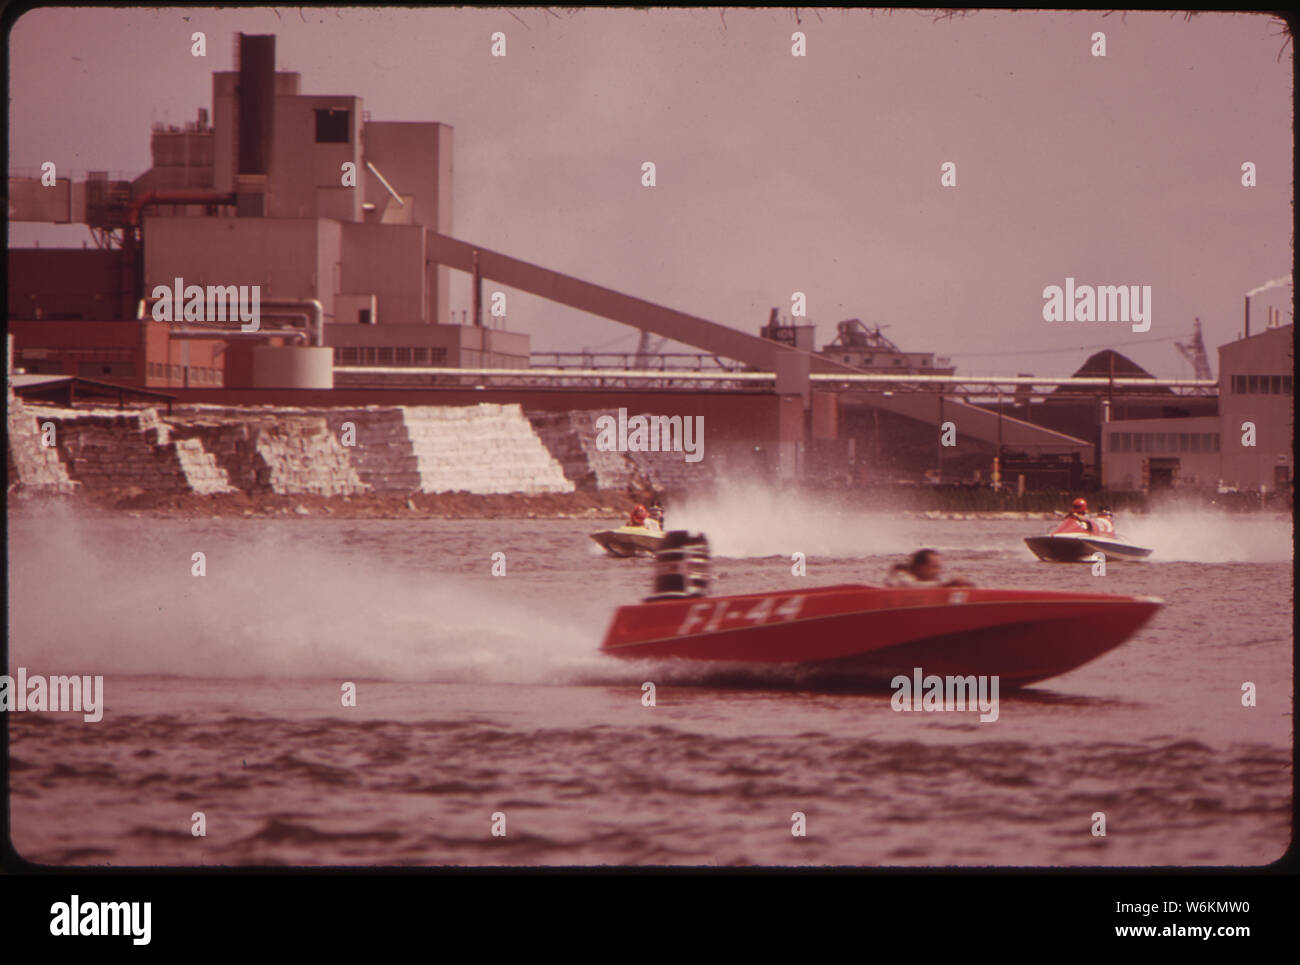 SPEEDBOAT RACING AT GREEN BAY. IN THE BACKGROUND IS THE FORT HOWARD PAPER COMPANY. PULP AND PAPER CONSTITUTE THE AREA'S LEADING INDUSTRY--AND A MAJOR SOURCE OF AIR AND WATER POLLUTION Stock Photo